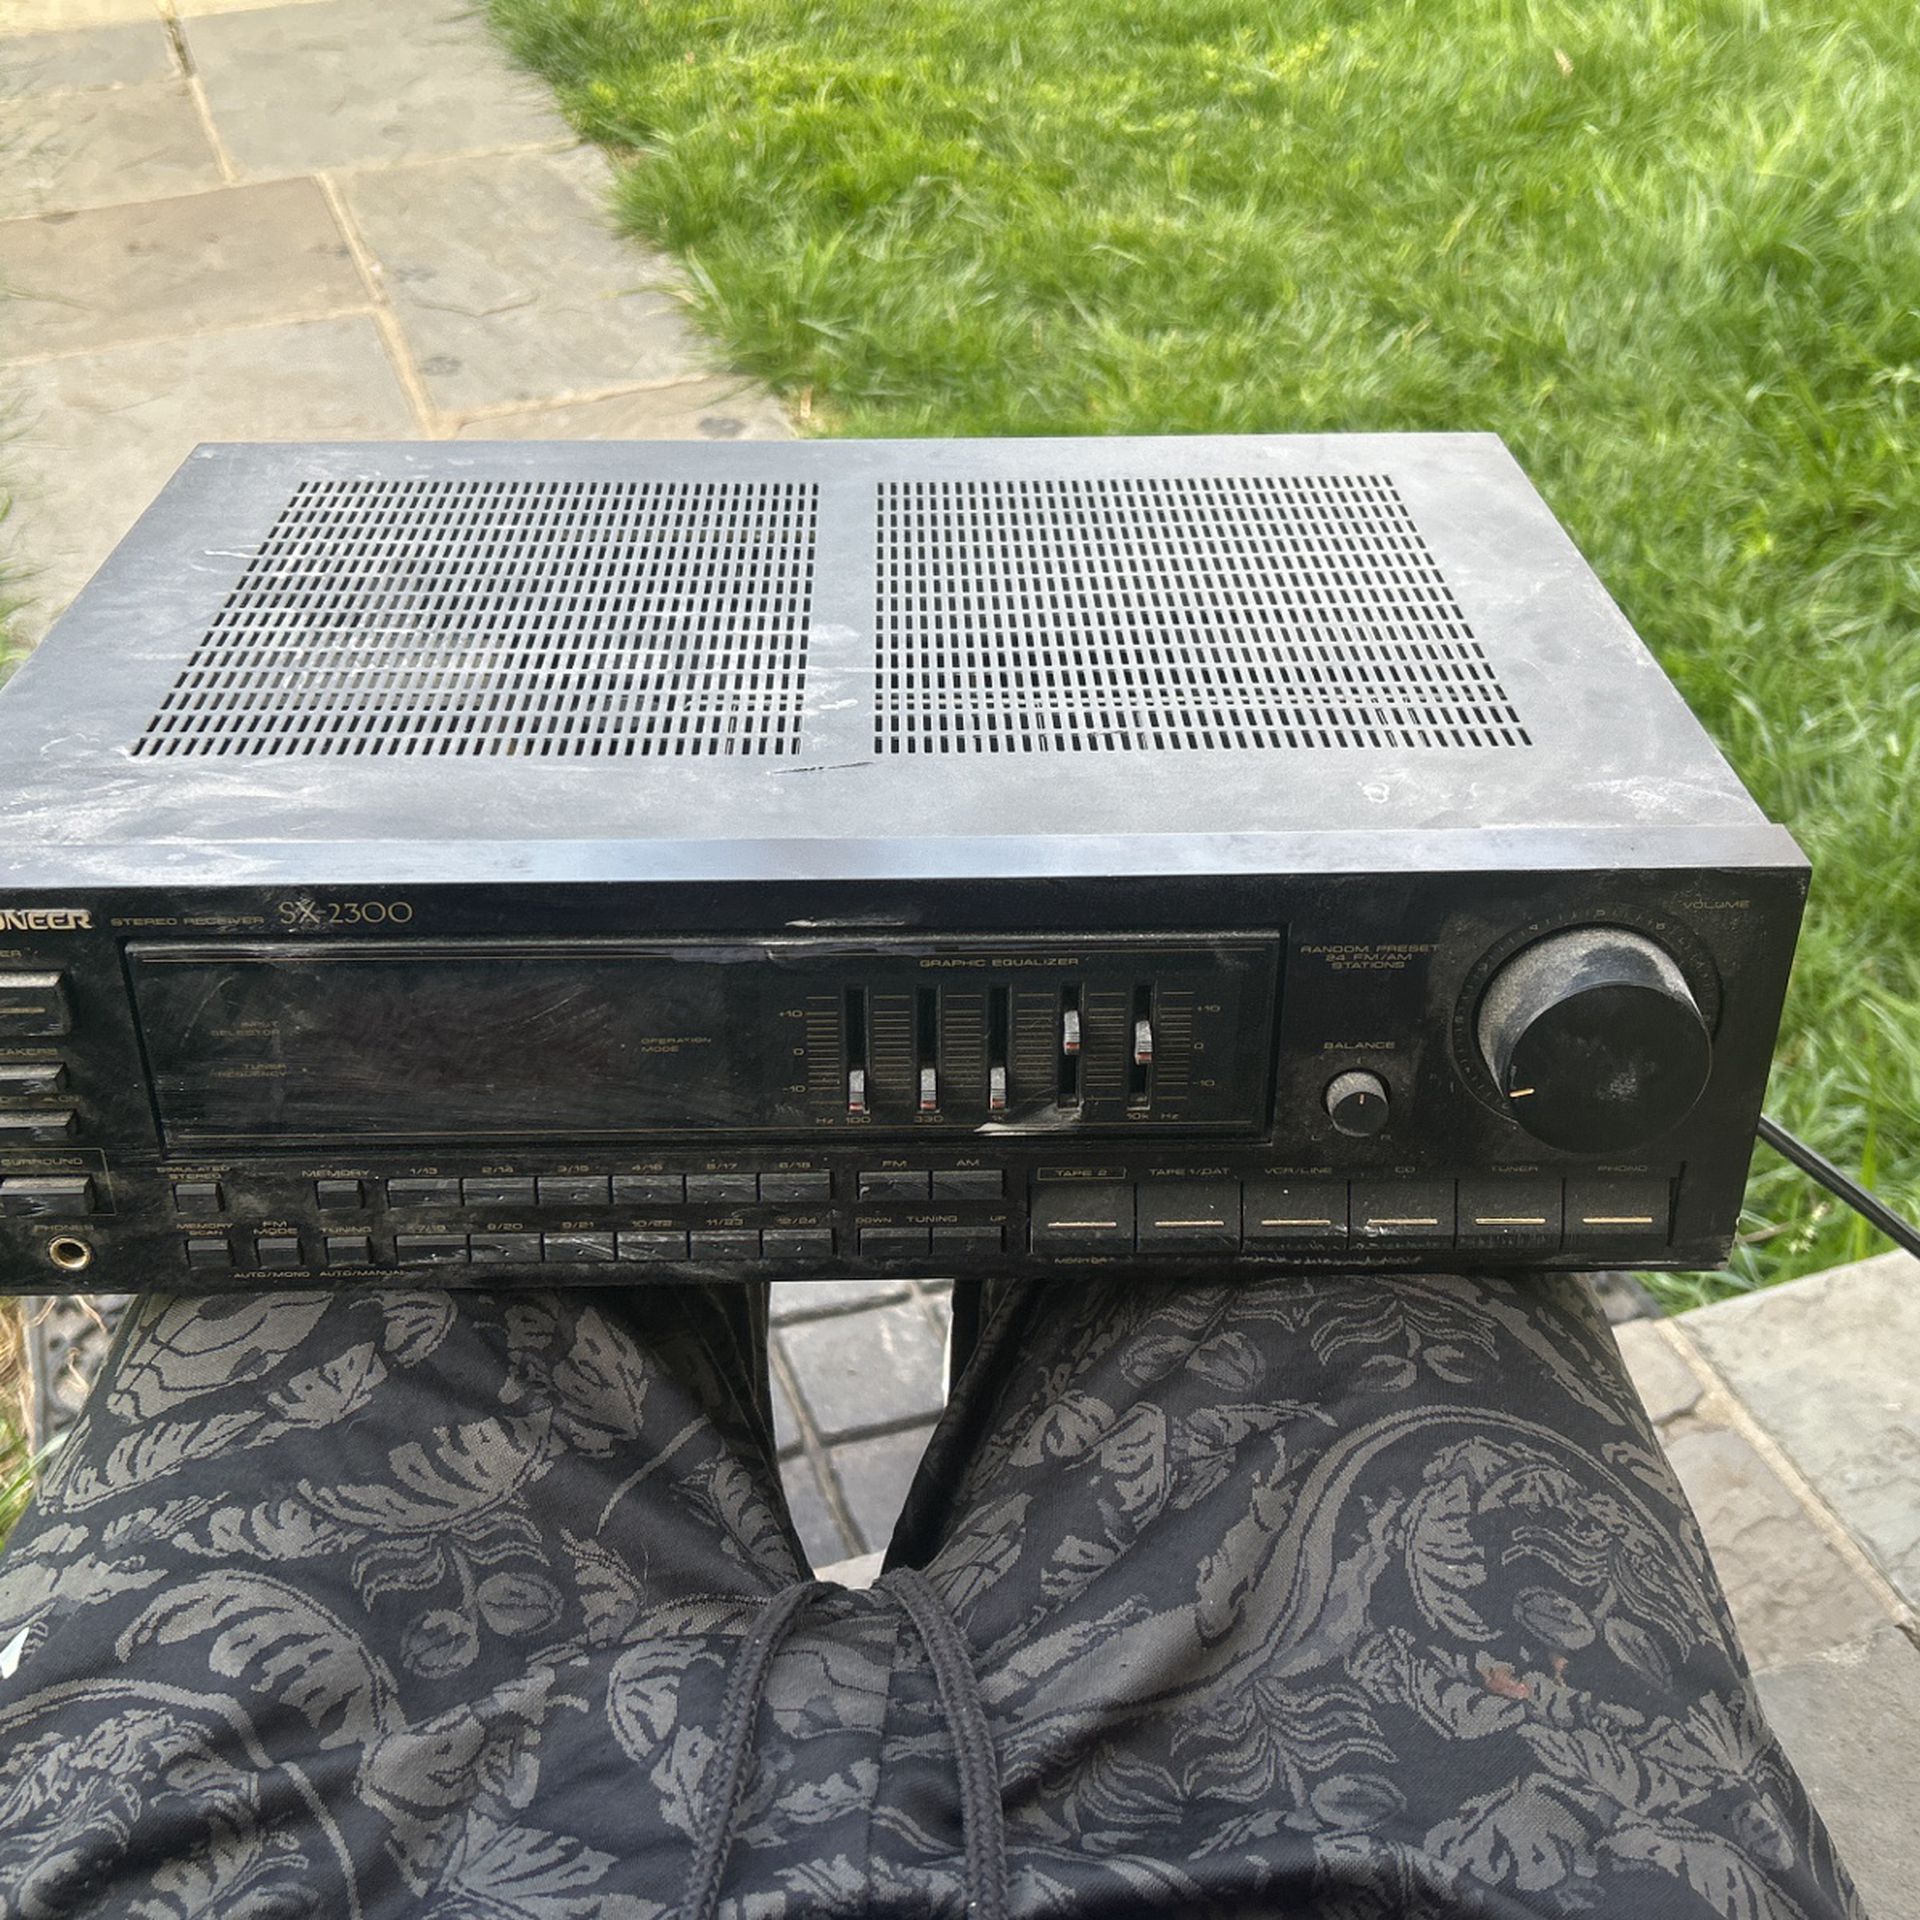 Sx-2300 stereo receiver